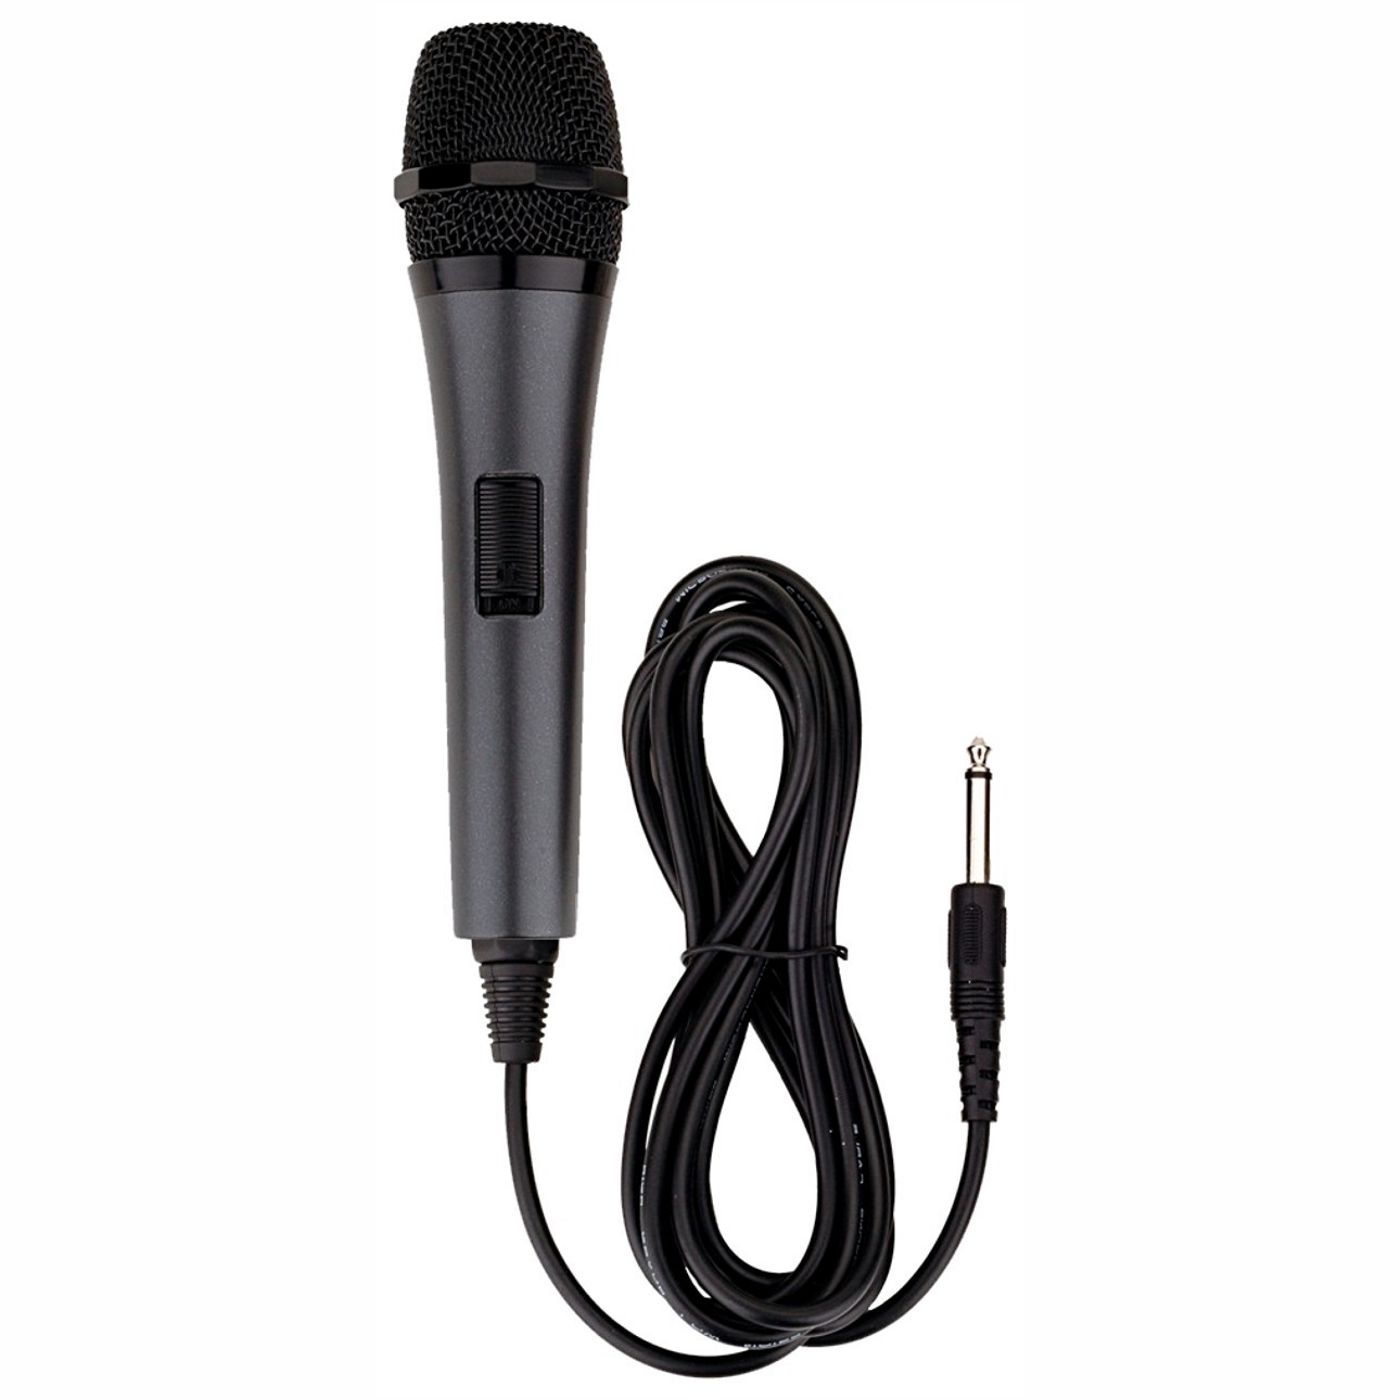 M187 - Professional Dynamic Microphone (Corded)